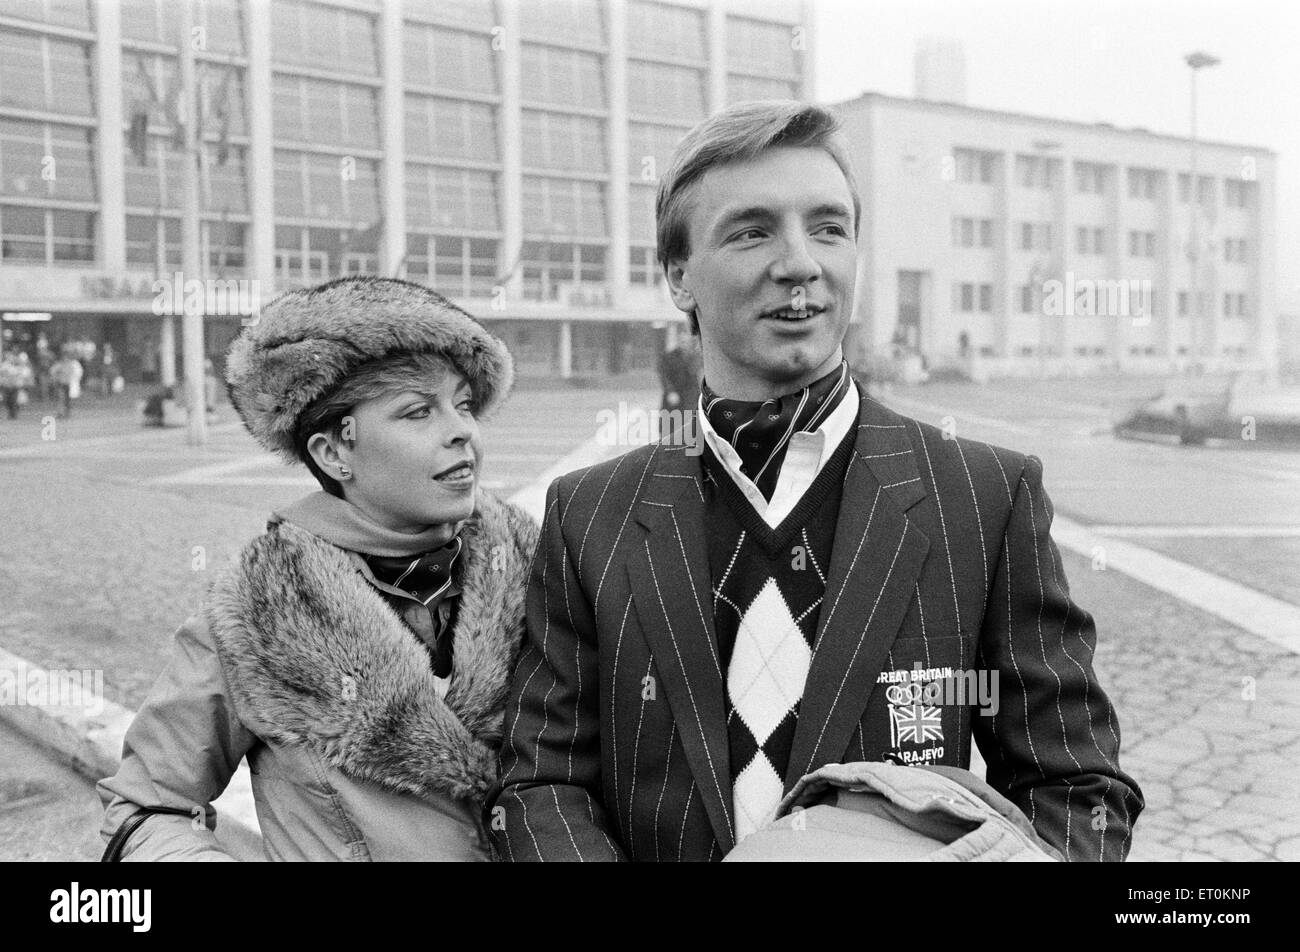 The arrival of British figure skating couple Jayne Torvill and Christopher Dean at the Sarajevo railway station, from West Germany. Winter Olympics in Sarajevo, Bosnia and Herzegovina (former Yugoslavia). 5th February 1984. Stock Photo